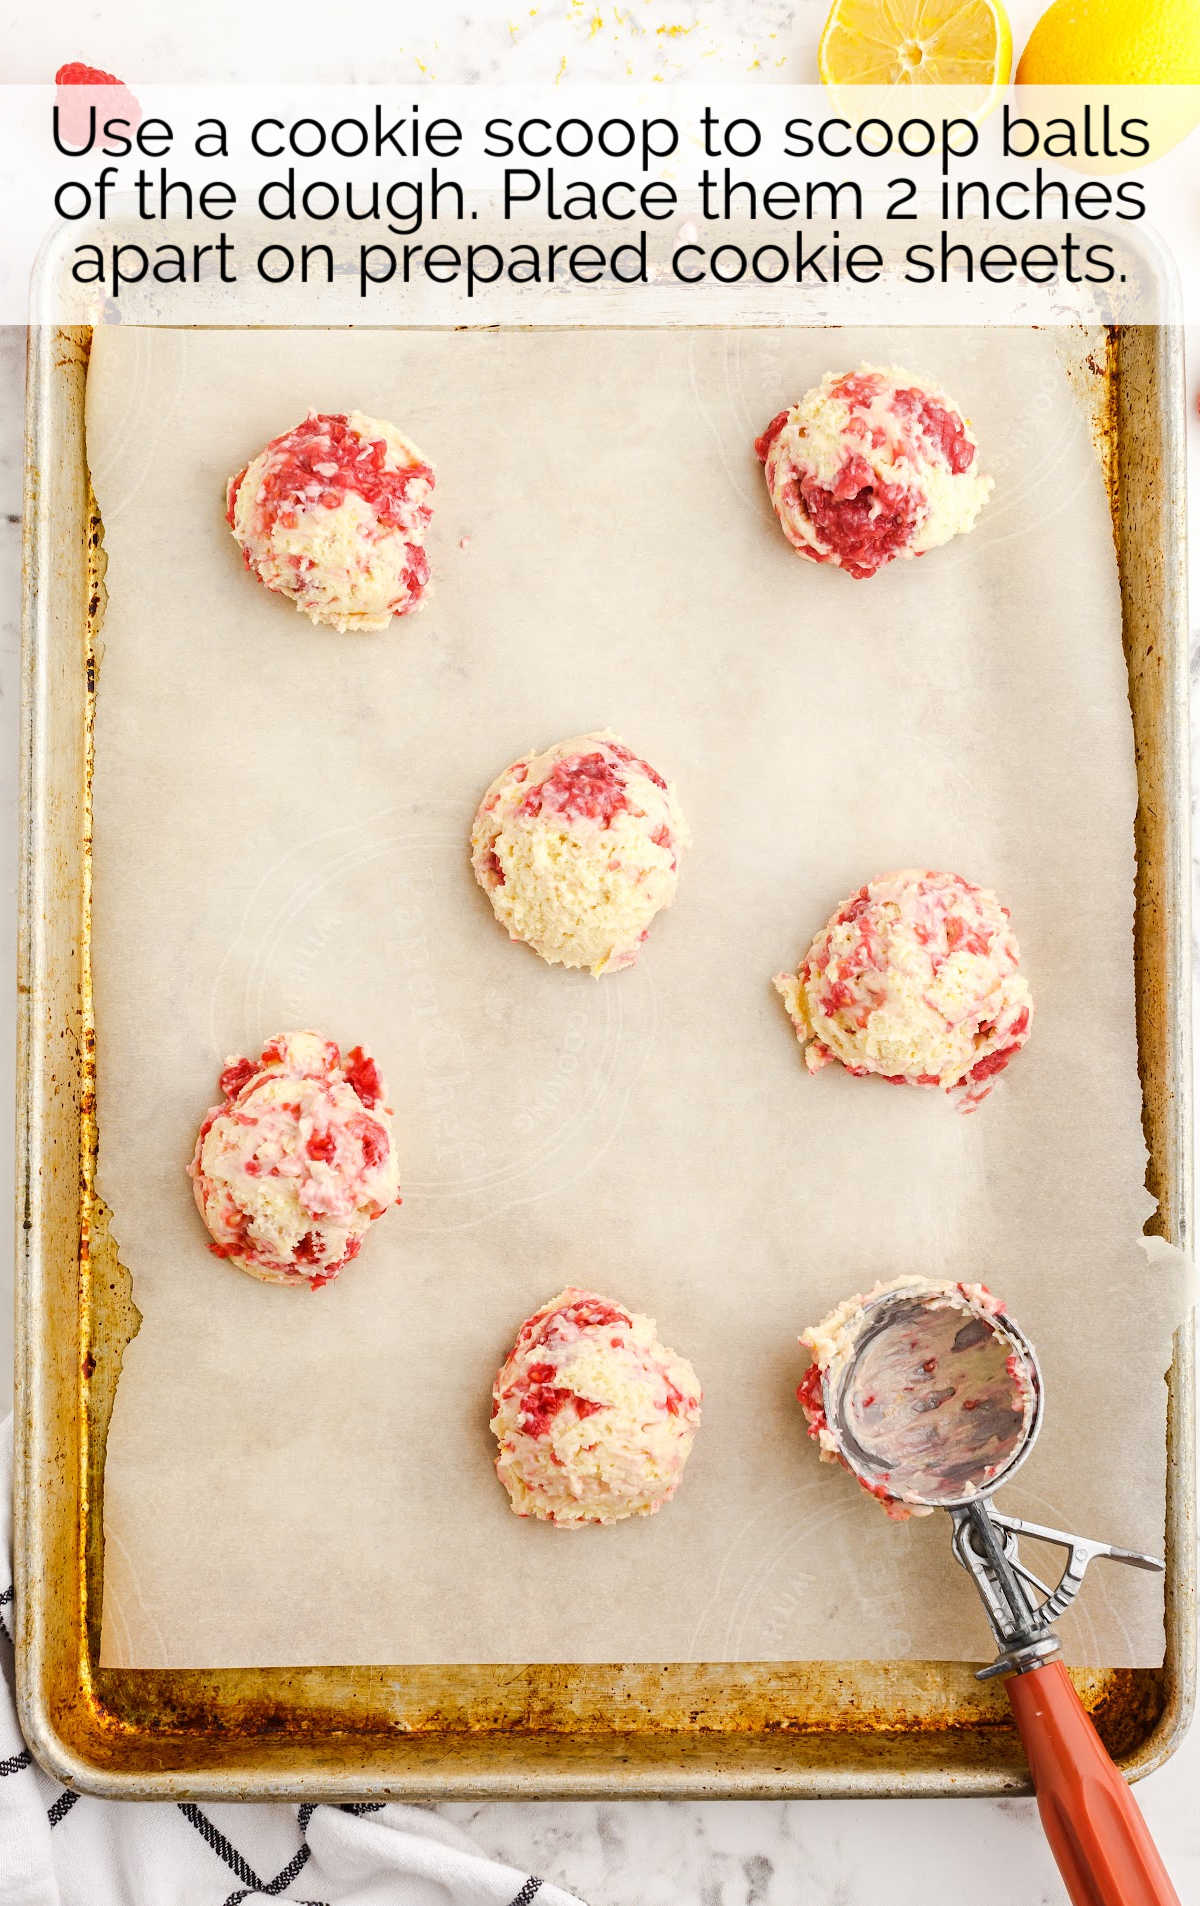 Lemon Raspberry Cookies dough placed in a baking dish using a cookie scooper